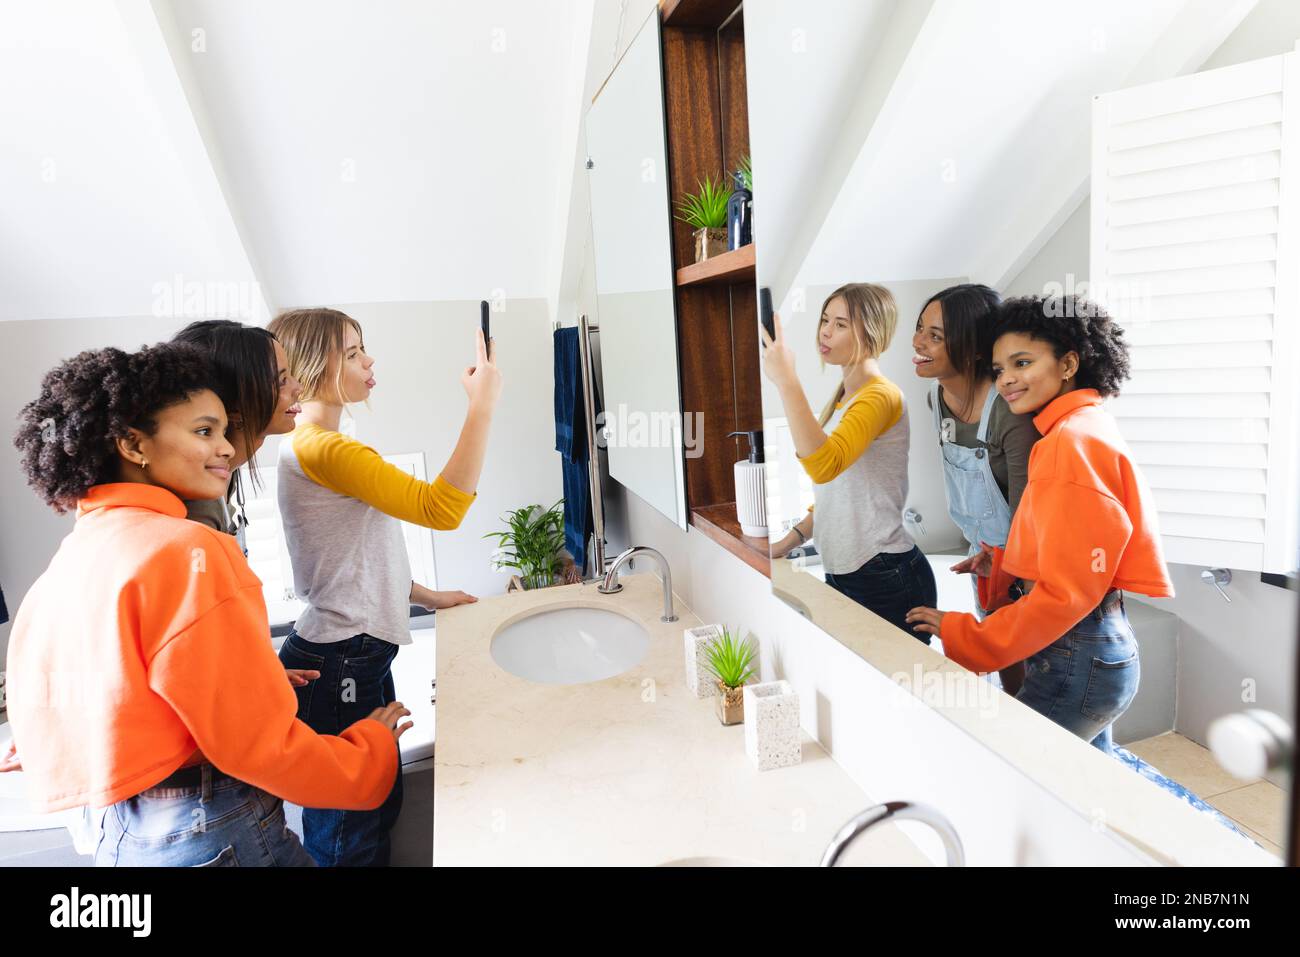 Happy diverse teenage female friends taking selfie in front of mirror. Spending quality time at home concept. Stock Photo